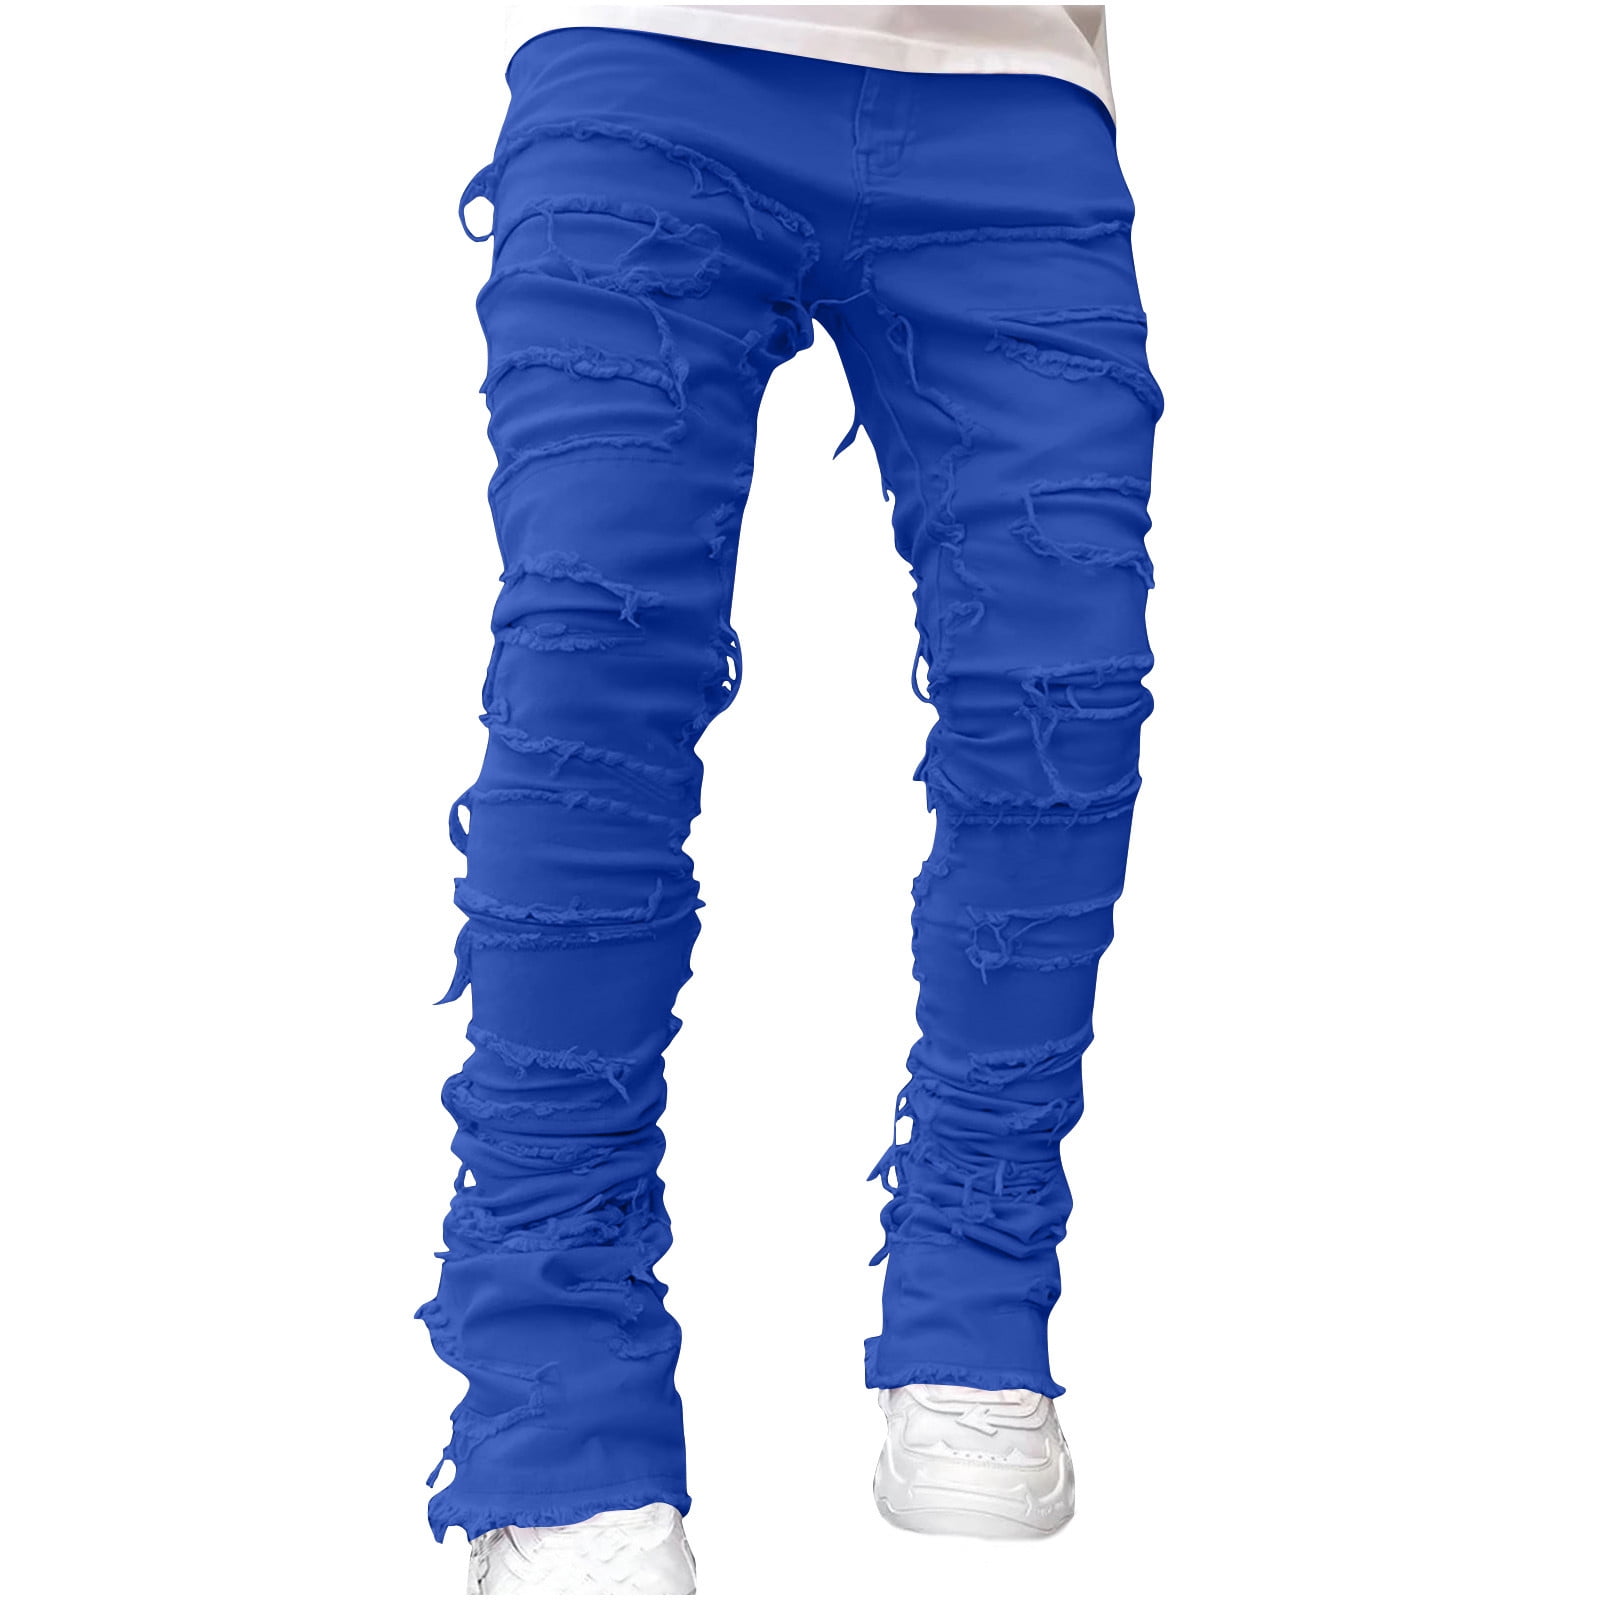 Trendy Vintage Baggy Jeans For Men And Women, Harajuku Punk Hip Hop High  Waist Jeans, Streetwear Cargo Pants, Wide Leg Pants From Cong04, $21.13 |  DHgate.Com